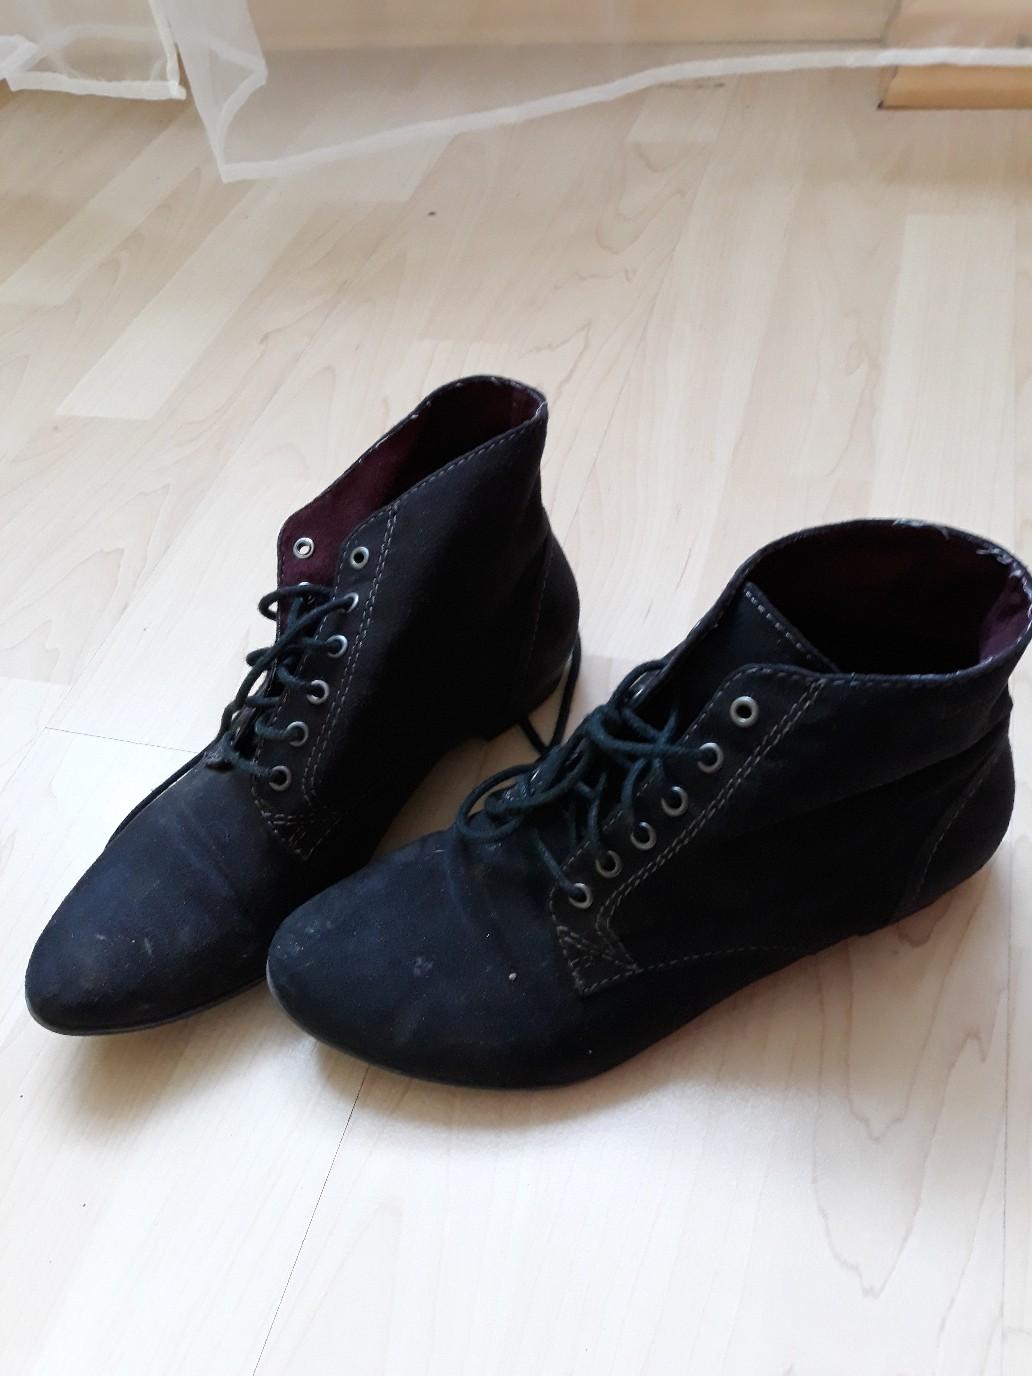 Schwarze Ankle Boots Von Tamaris 37 In Eching For 10 00 For Sale Shpock